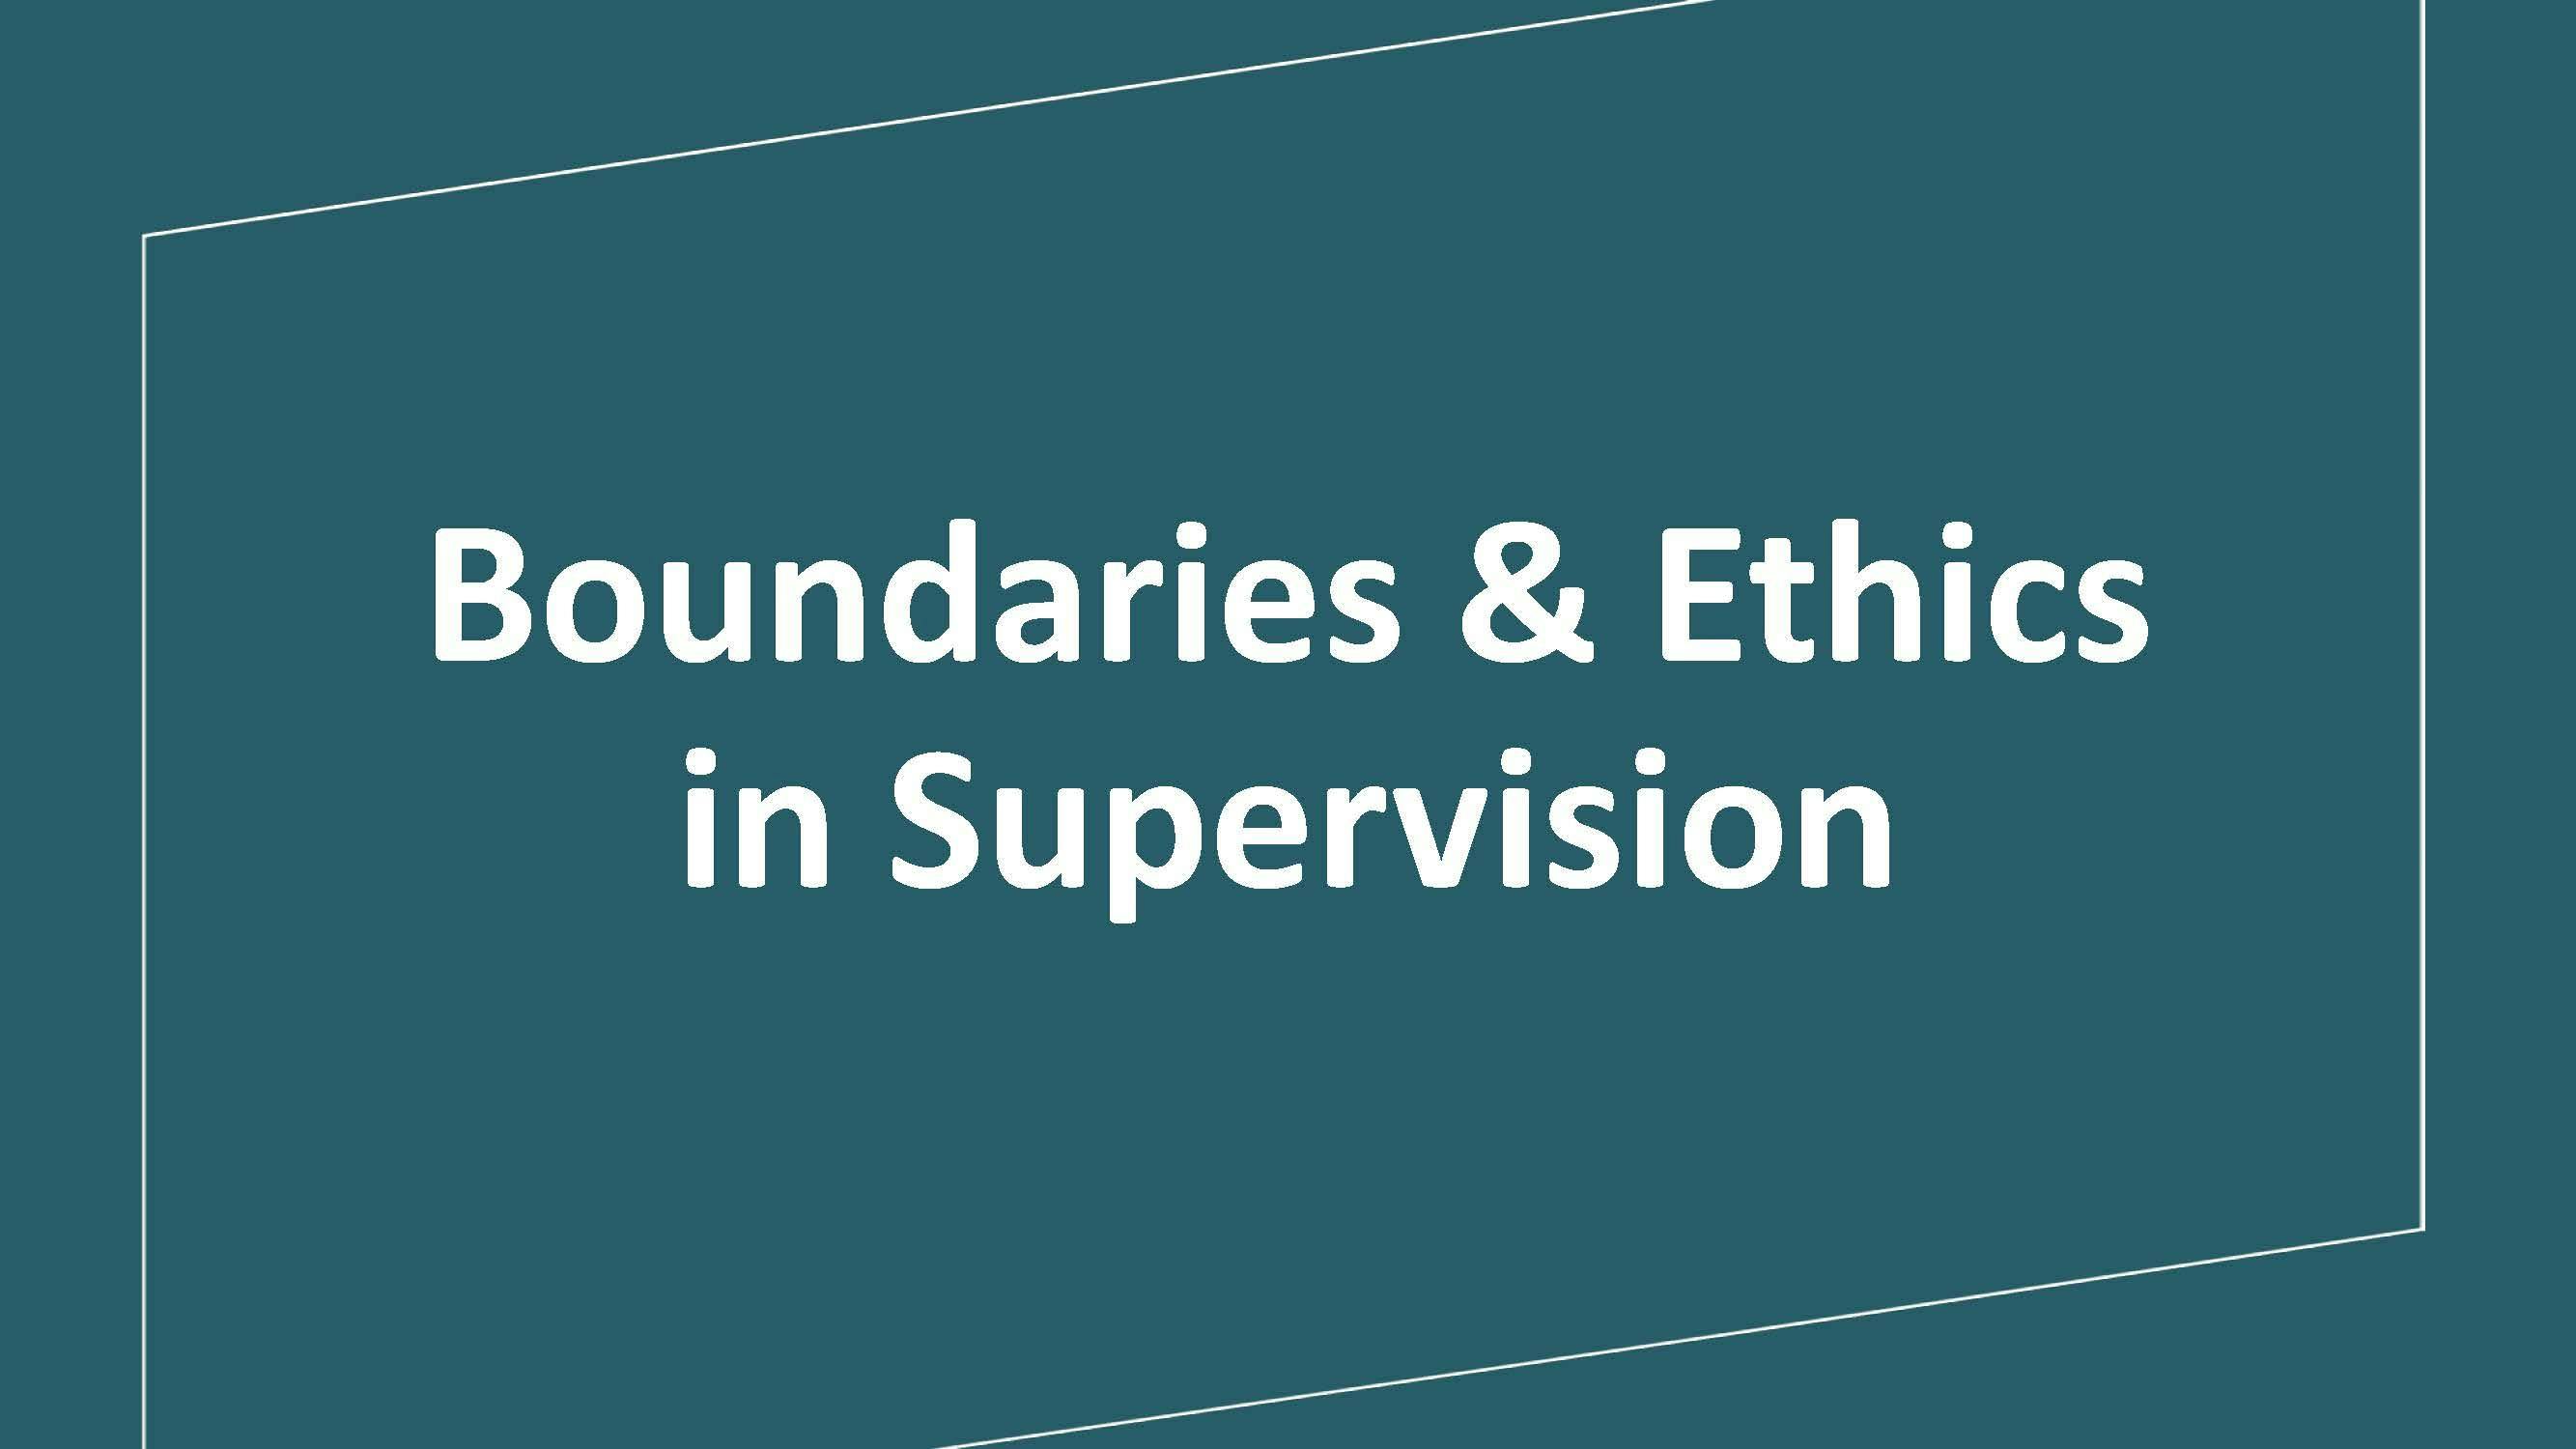 Boundaries & Ethics in Supervision